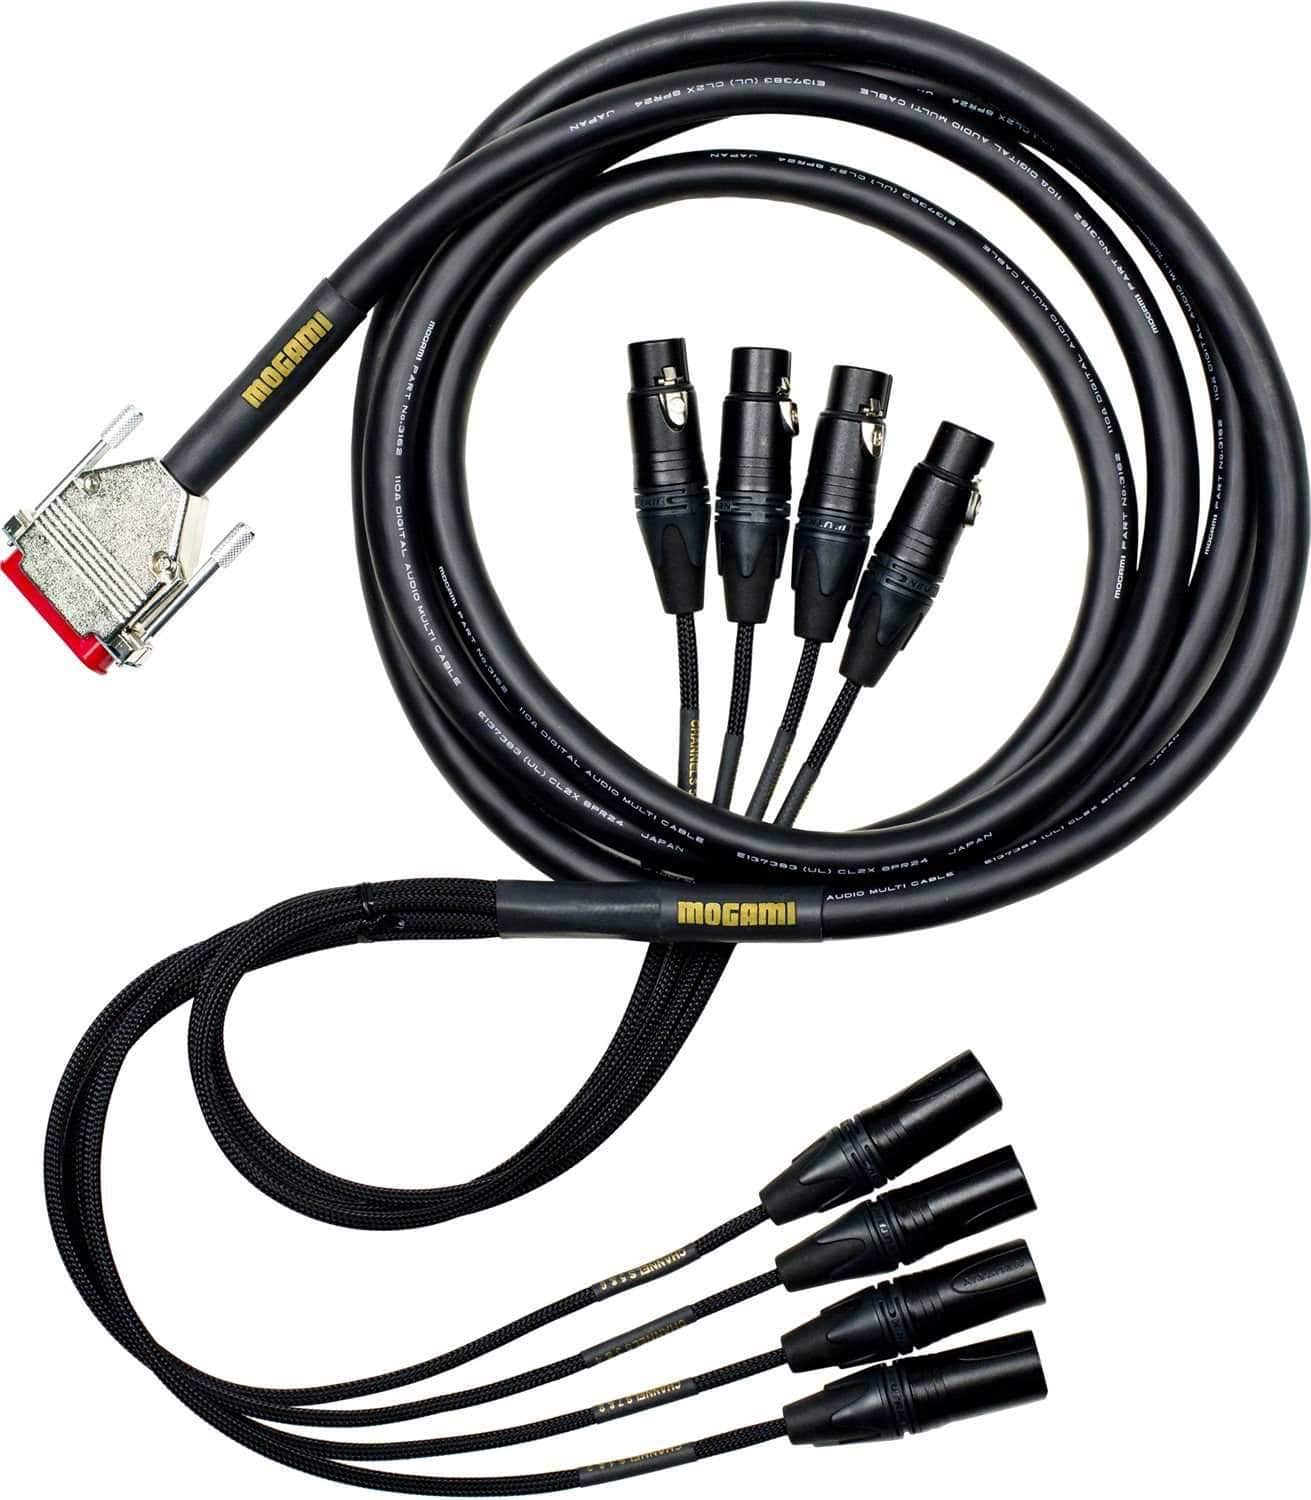 Mogami Digital AES EBU XLR to DB25 Cable 50ft - ProSound and Stage Lighting